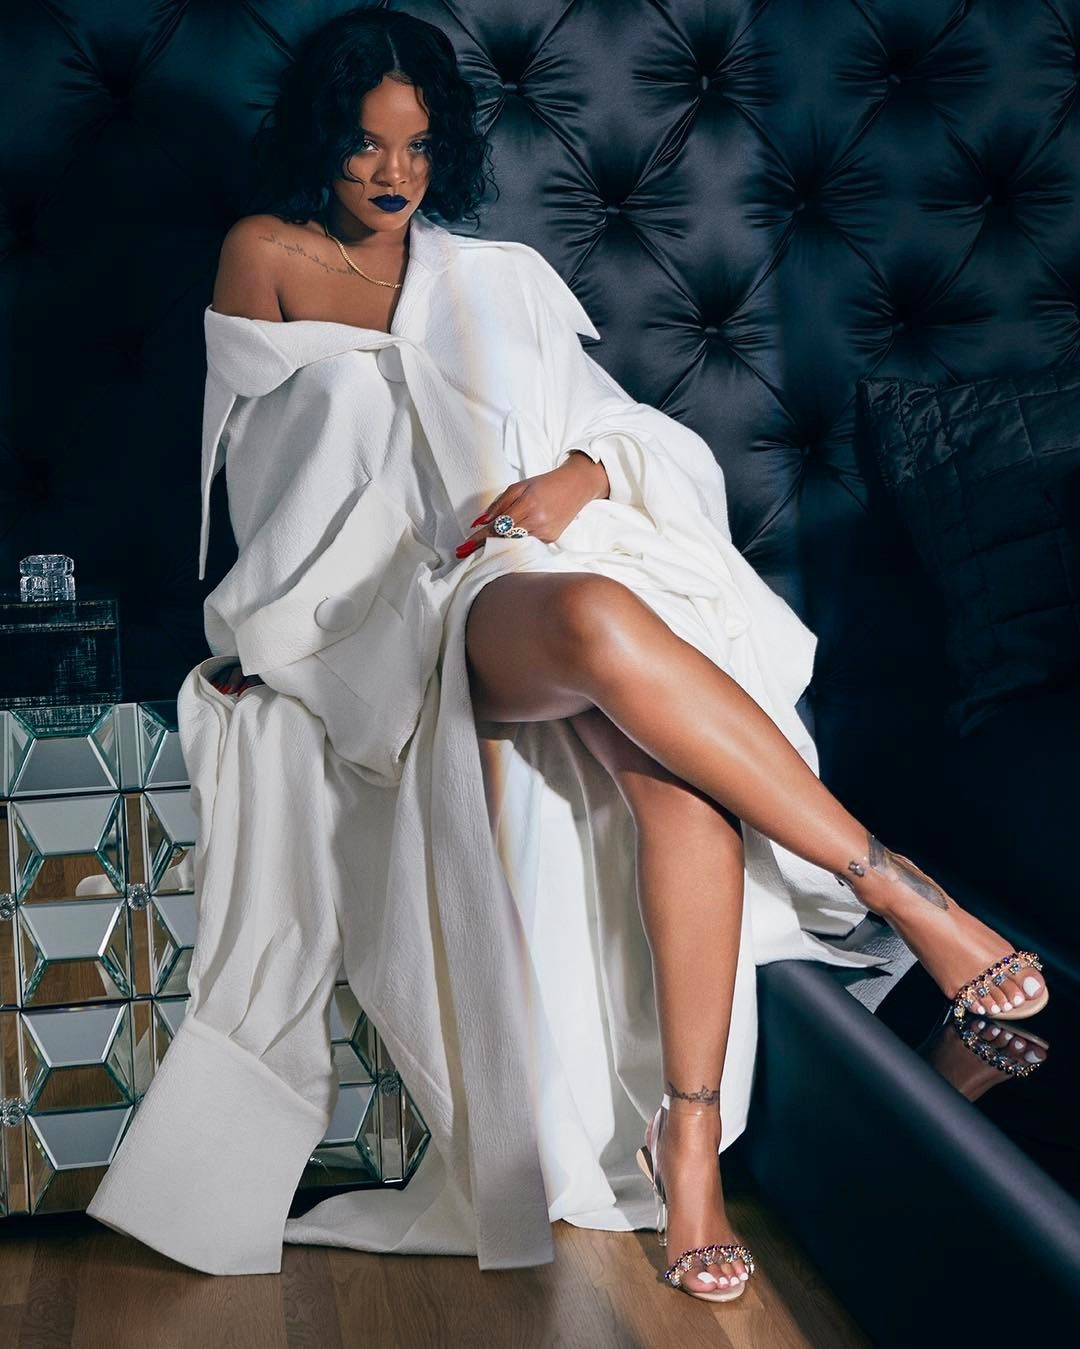 Rihanna in a Cong Tri shirt in a shoot for her Manolo Blahnik collaboration. She has helped boost the Vietnamese label, which is now worn by many Hollywood celebrities.